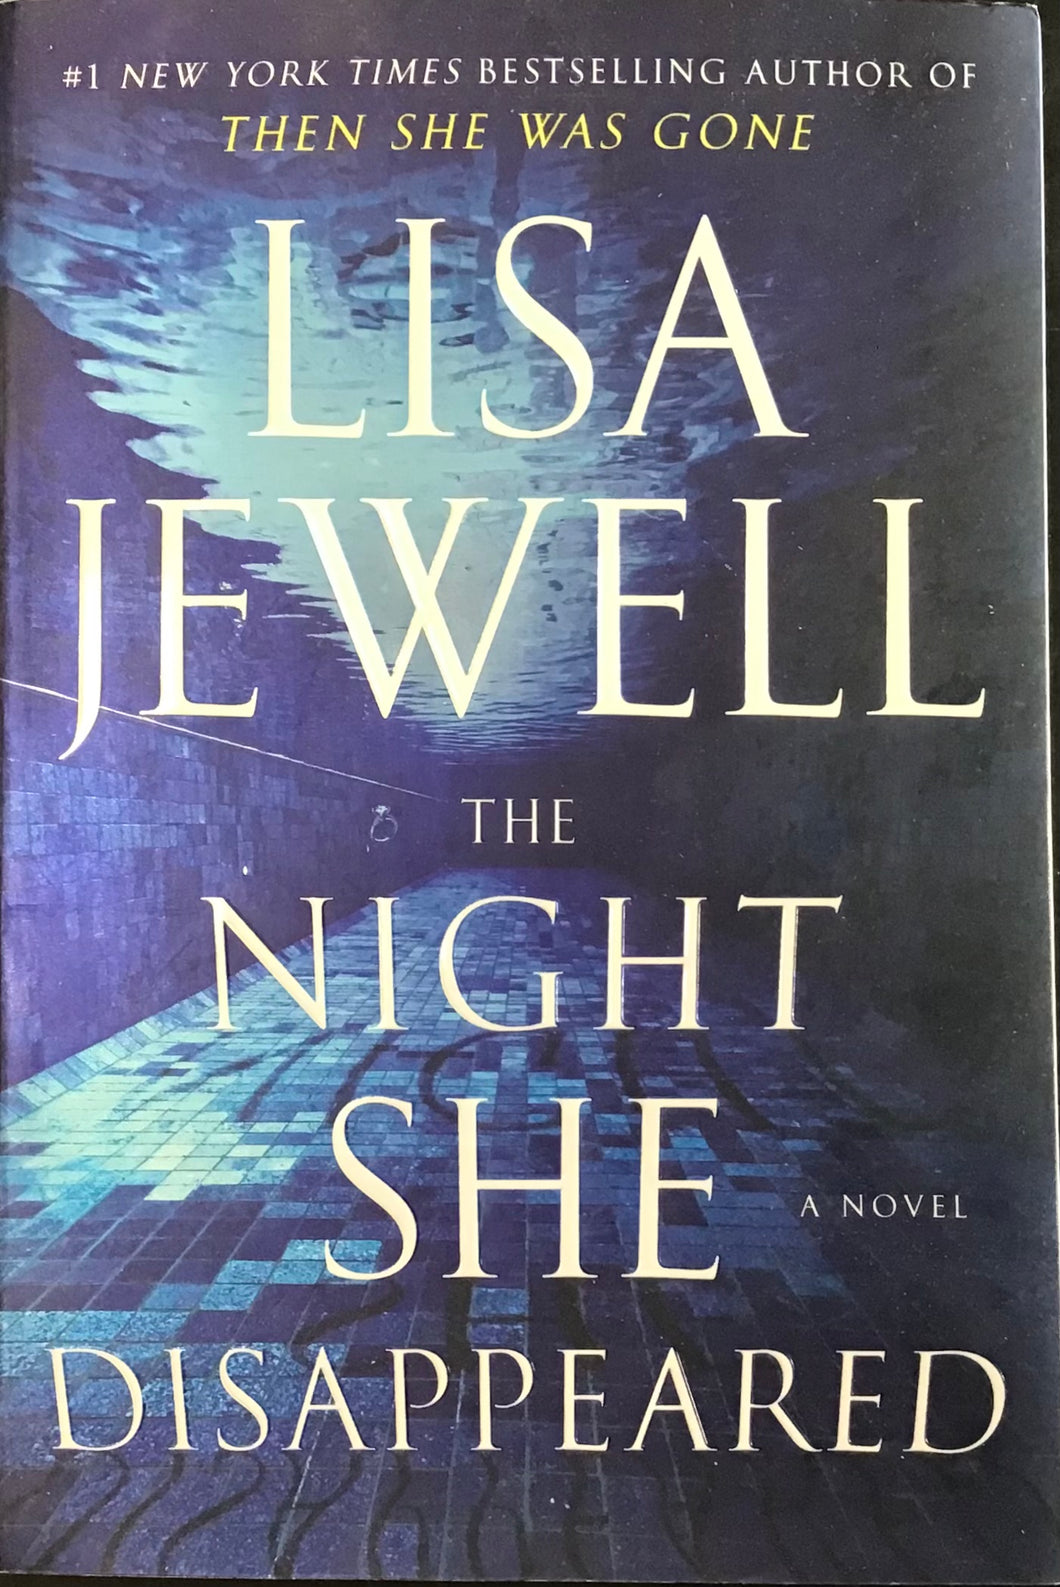 The Night She Disappeared, Lisa Jewell